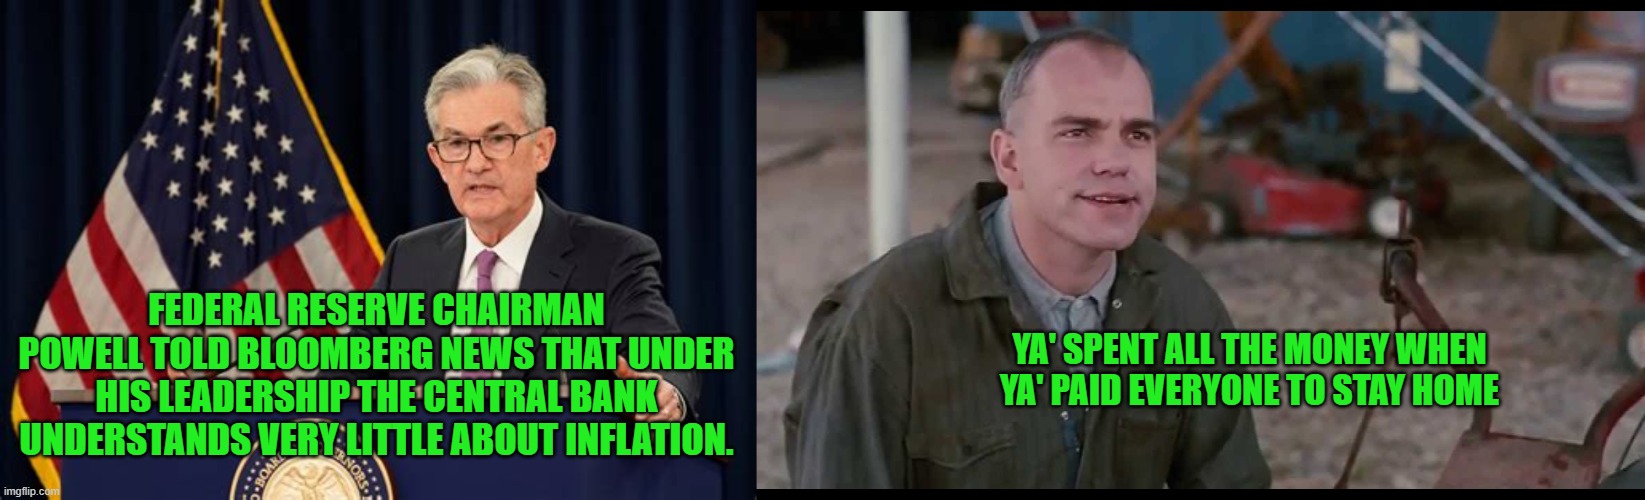 High Finance Thinkers | FEDERAL RESERVE CHAIRMAN POWELL TOLD BLOOMBERG NEWS THAT UNDER HIS LEADERSHIP THE CENTRAL BANK UNDERSTANDS VERY LITTLE ABOUT INFLATION. YA' SPENT ALL THE MONEY WHEN YA' PAID EVERYONE TO STAY HOME | made w/ Imgflip meme maker